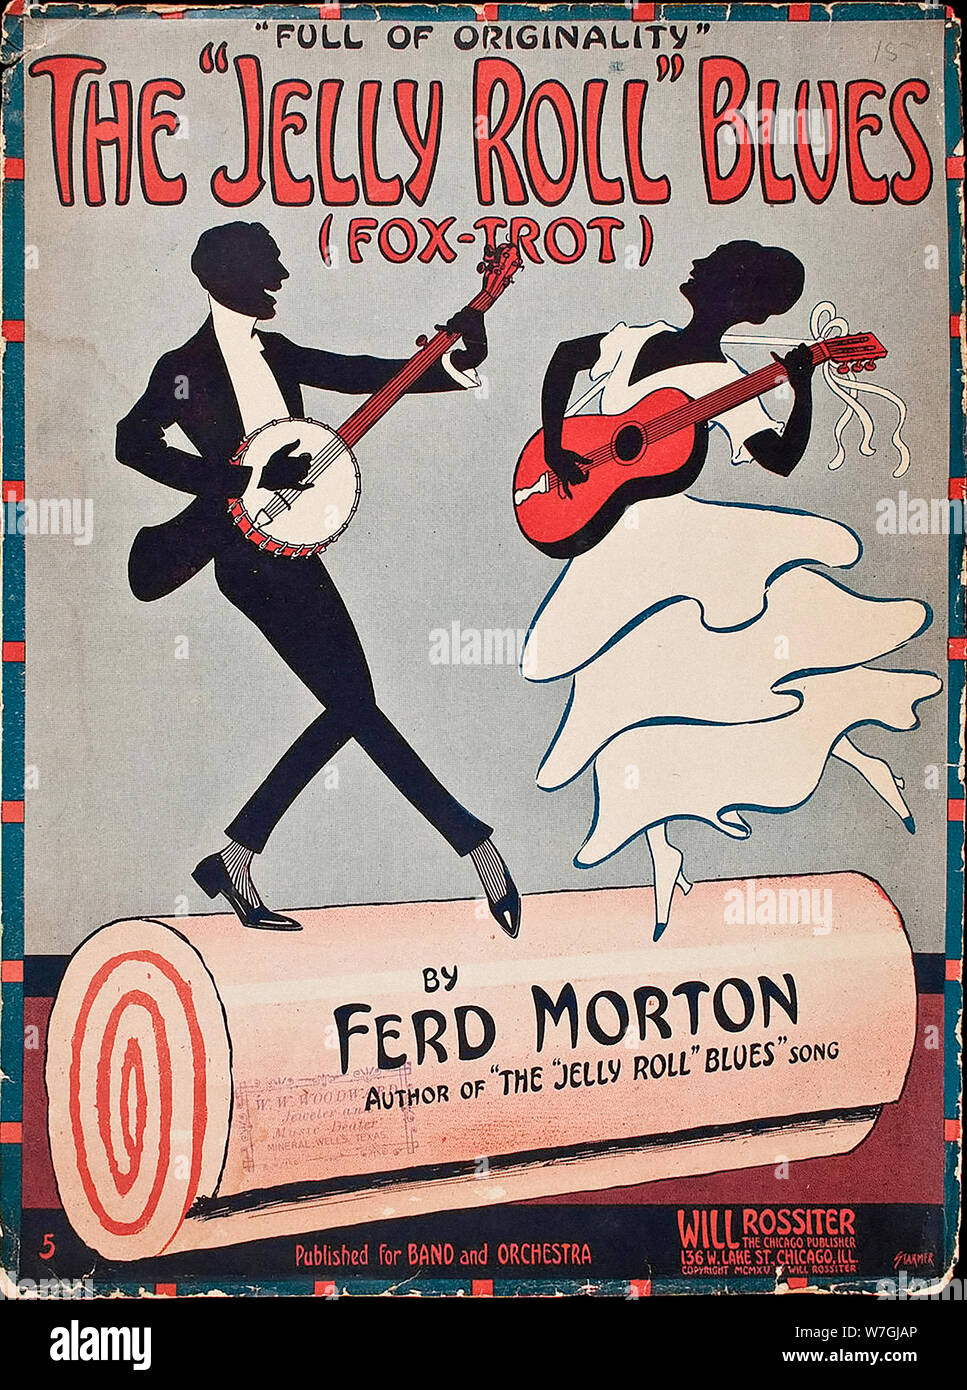 Cover of the First jazz published in America - The “Jelly Roll” Blues (Fox-Trot) Morton, Ferd - 1915 Stock Photo